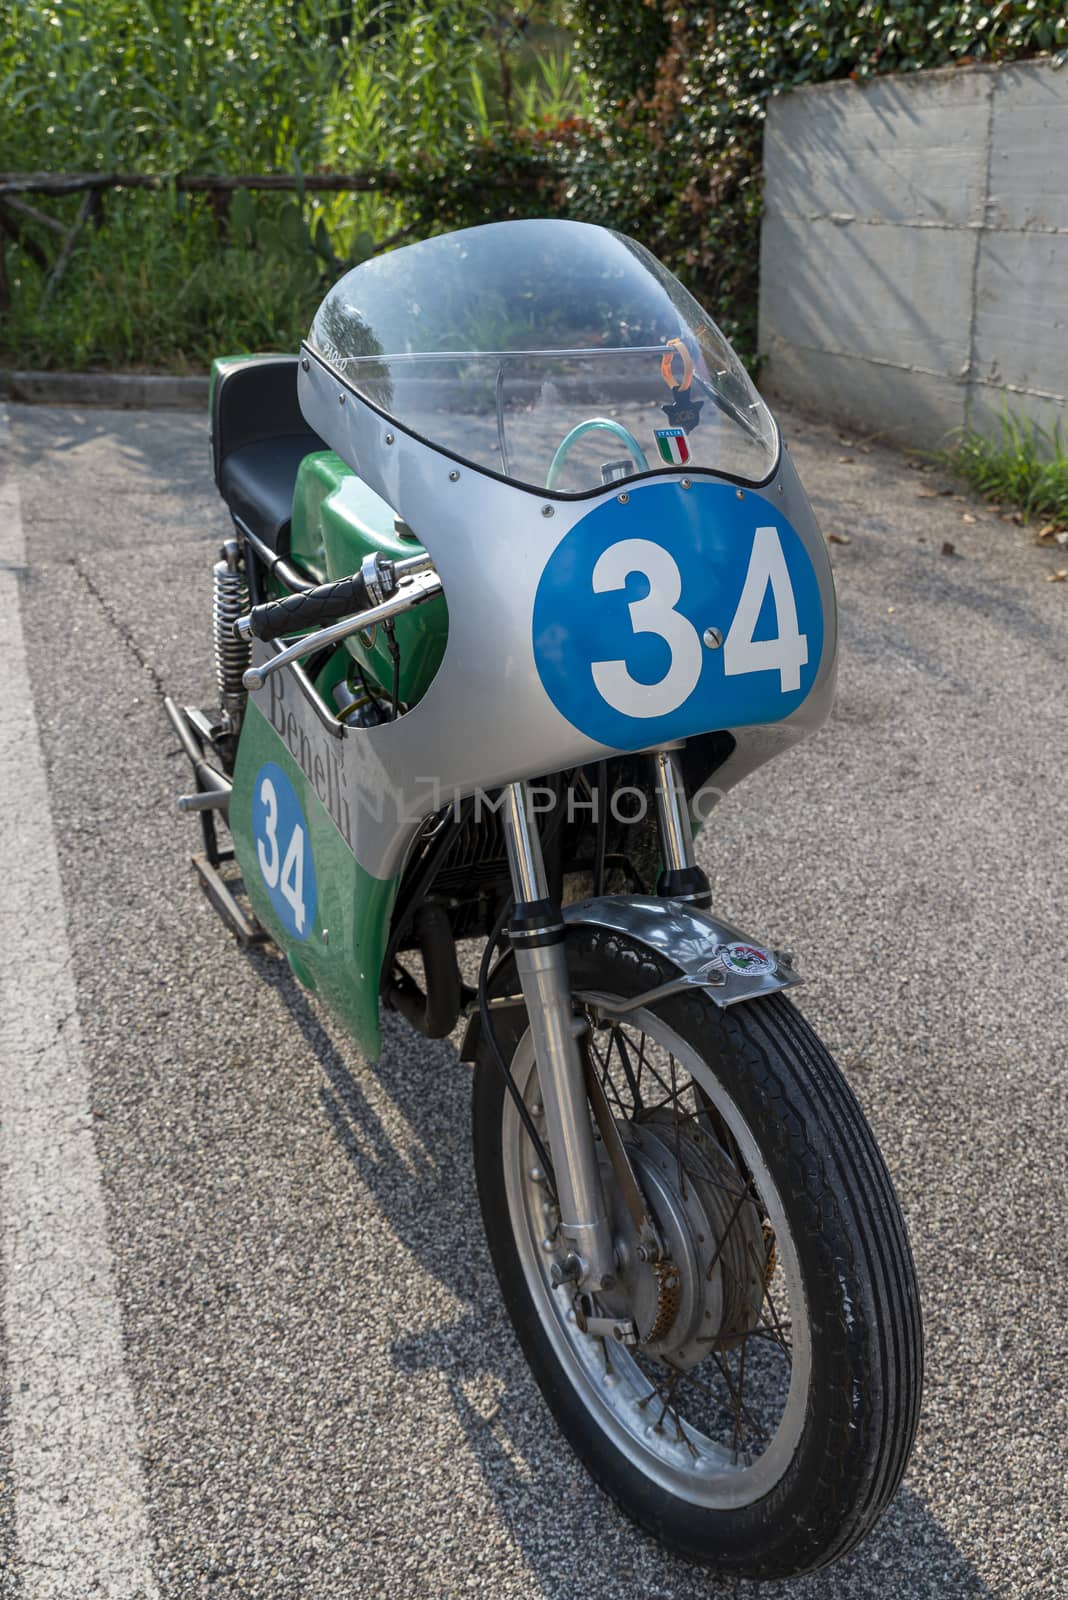 TERNI,ITALY SEPTEMBER 18 2020:detail of a vintage benelli 250 motorcycle